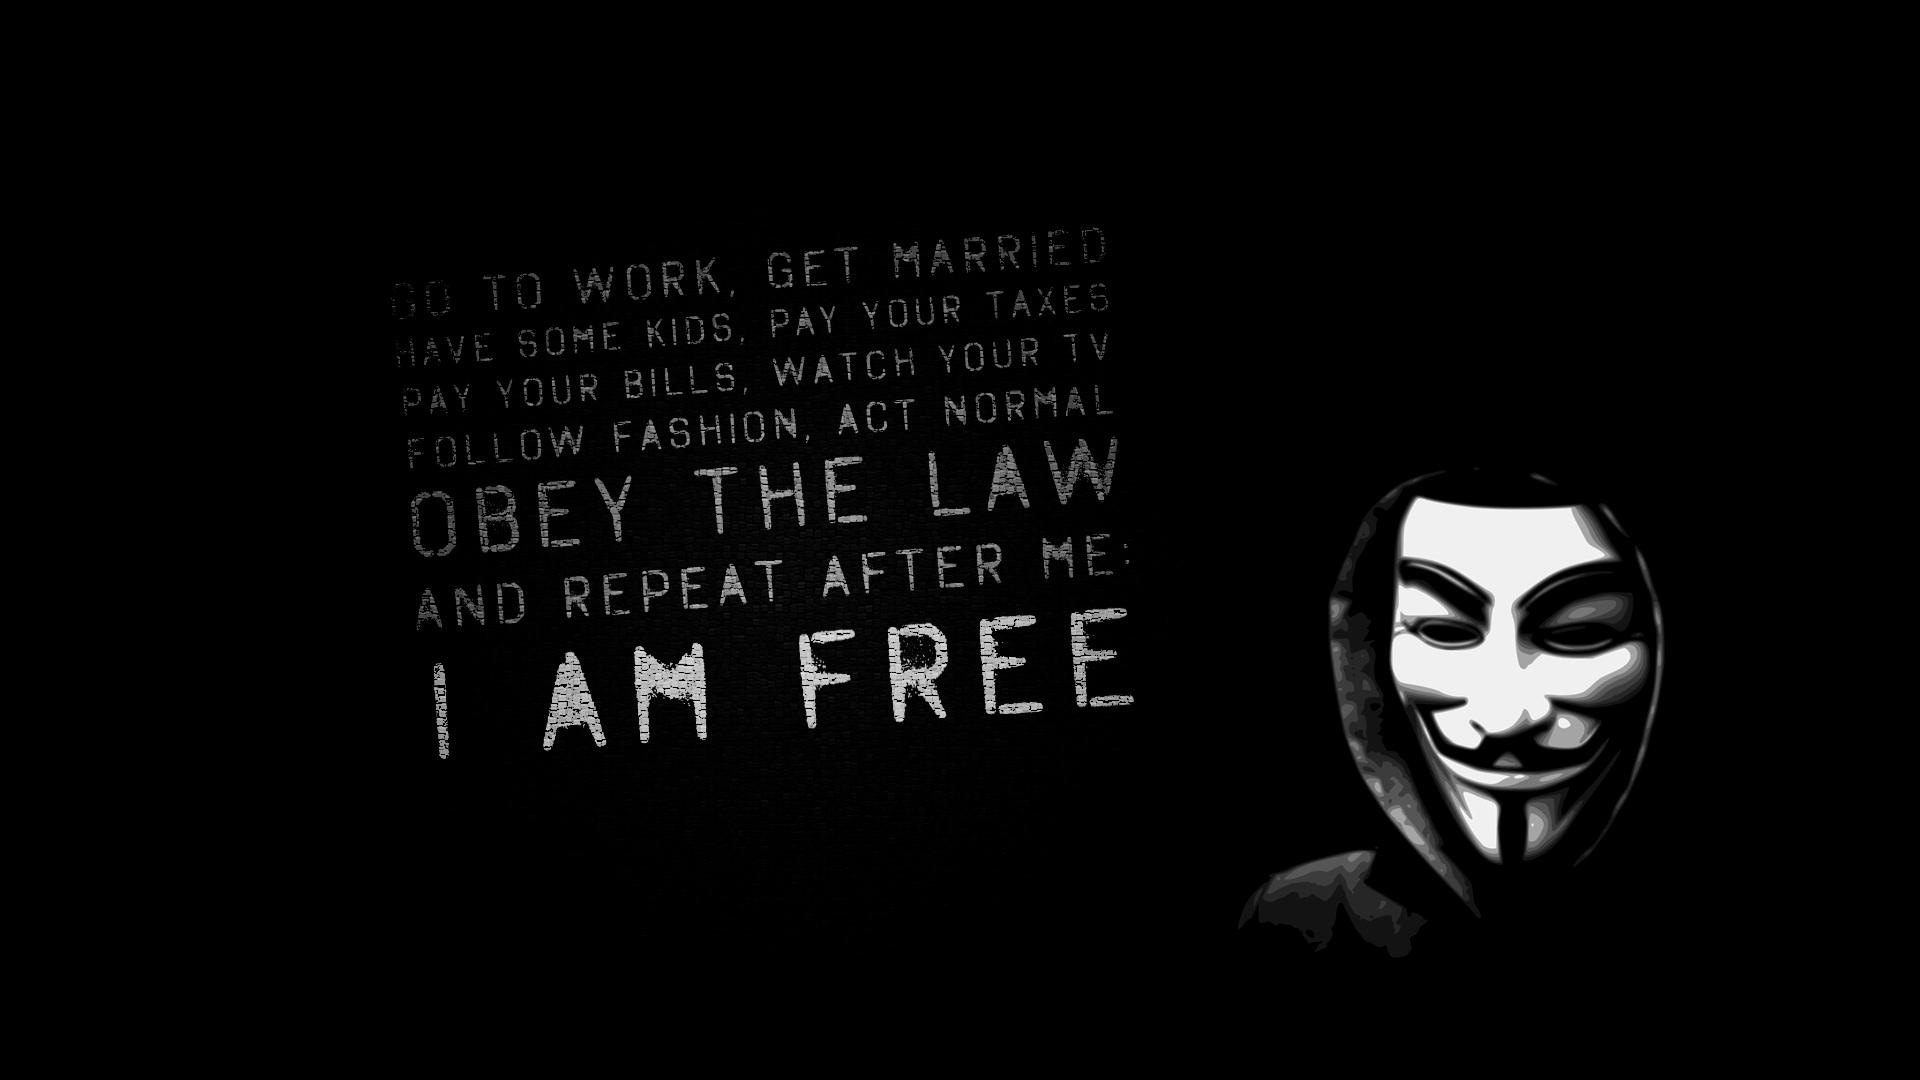 Is violence acceptable in the name of Freedom Anonymous text quotes Guy Fawkes V for Vendetta black background